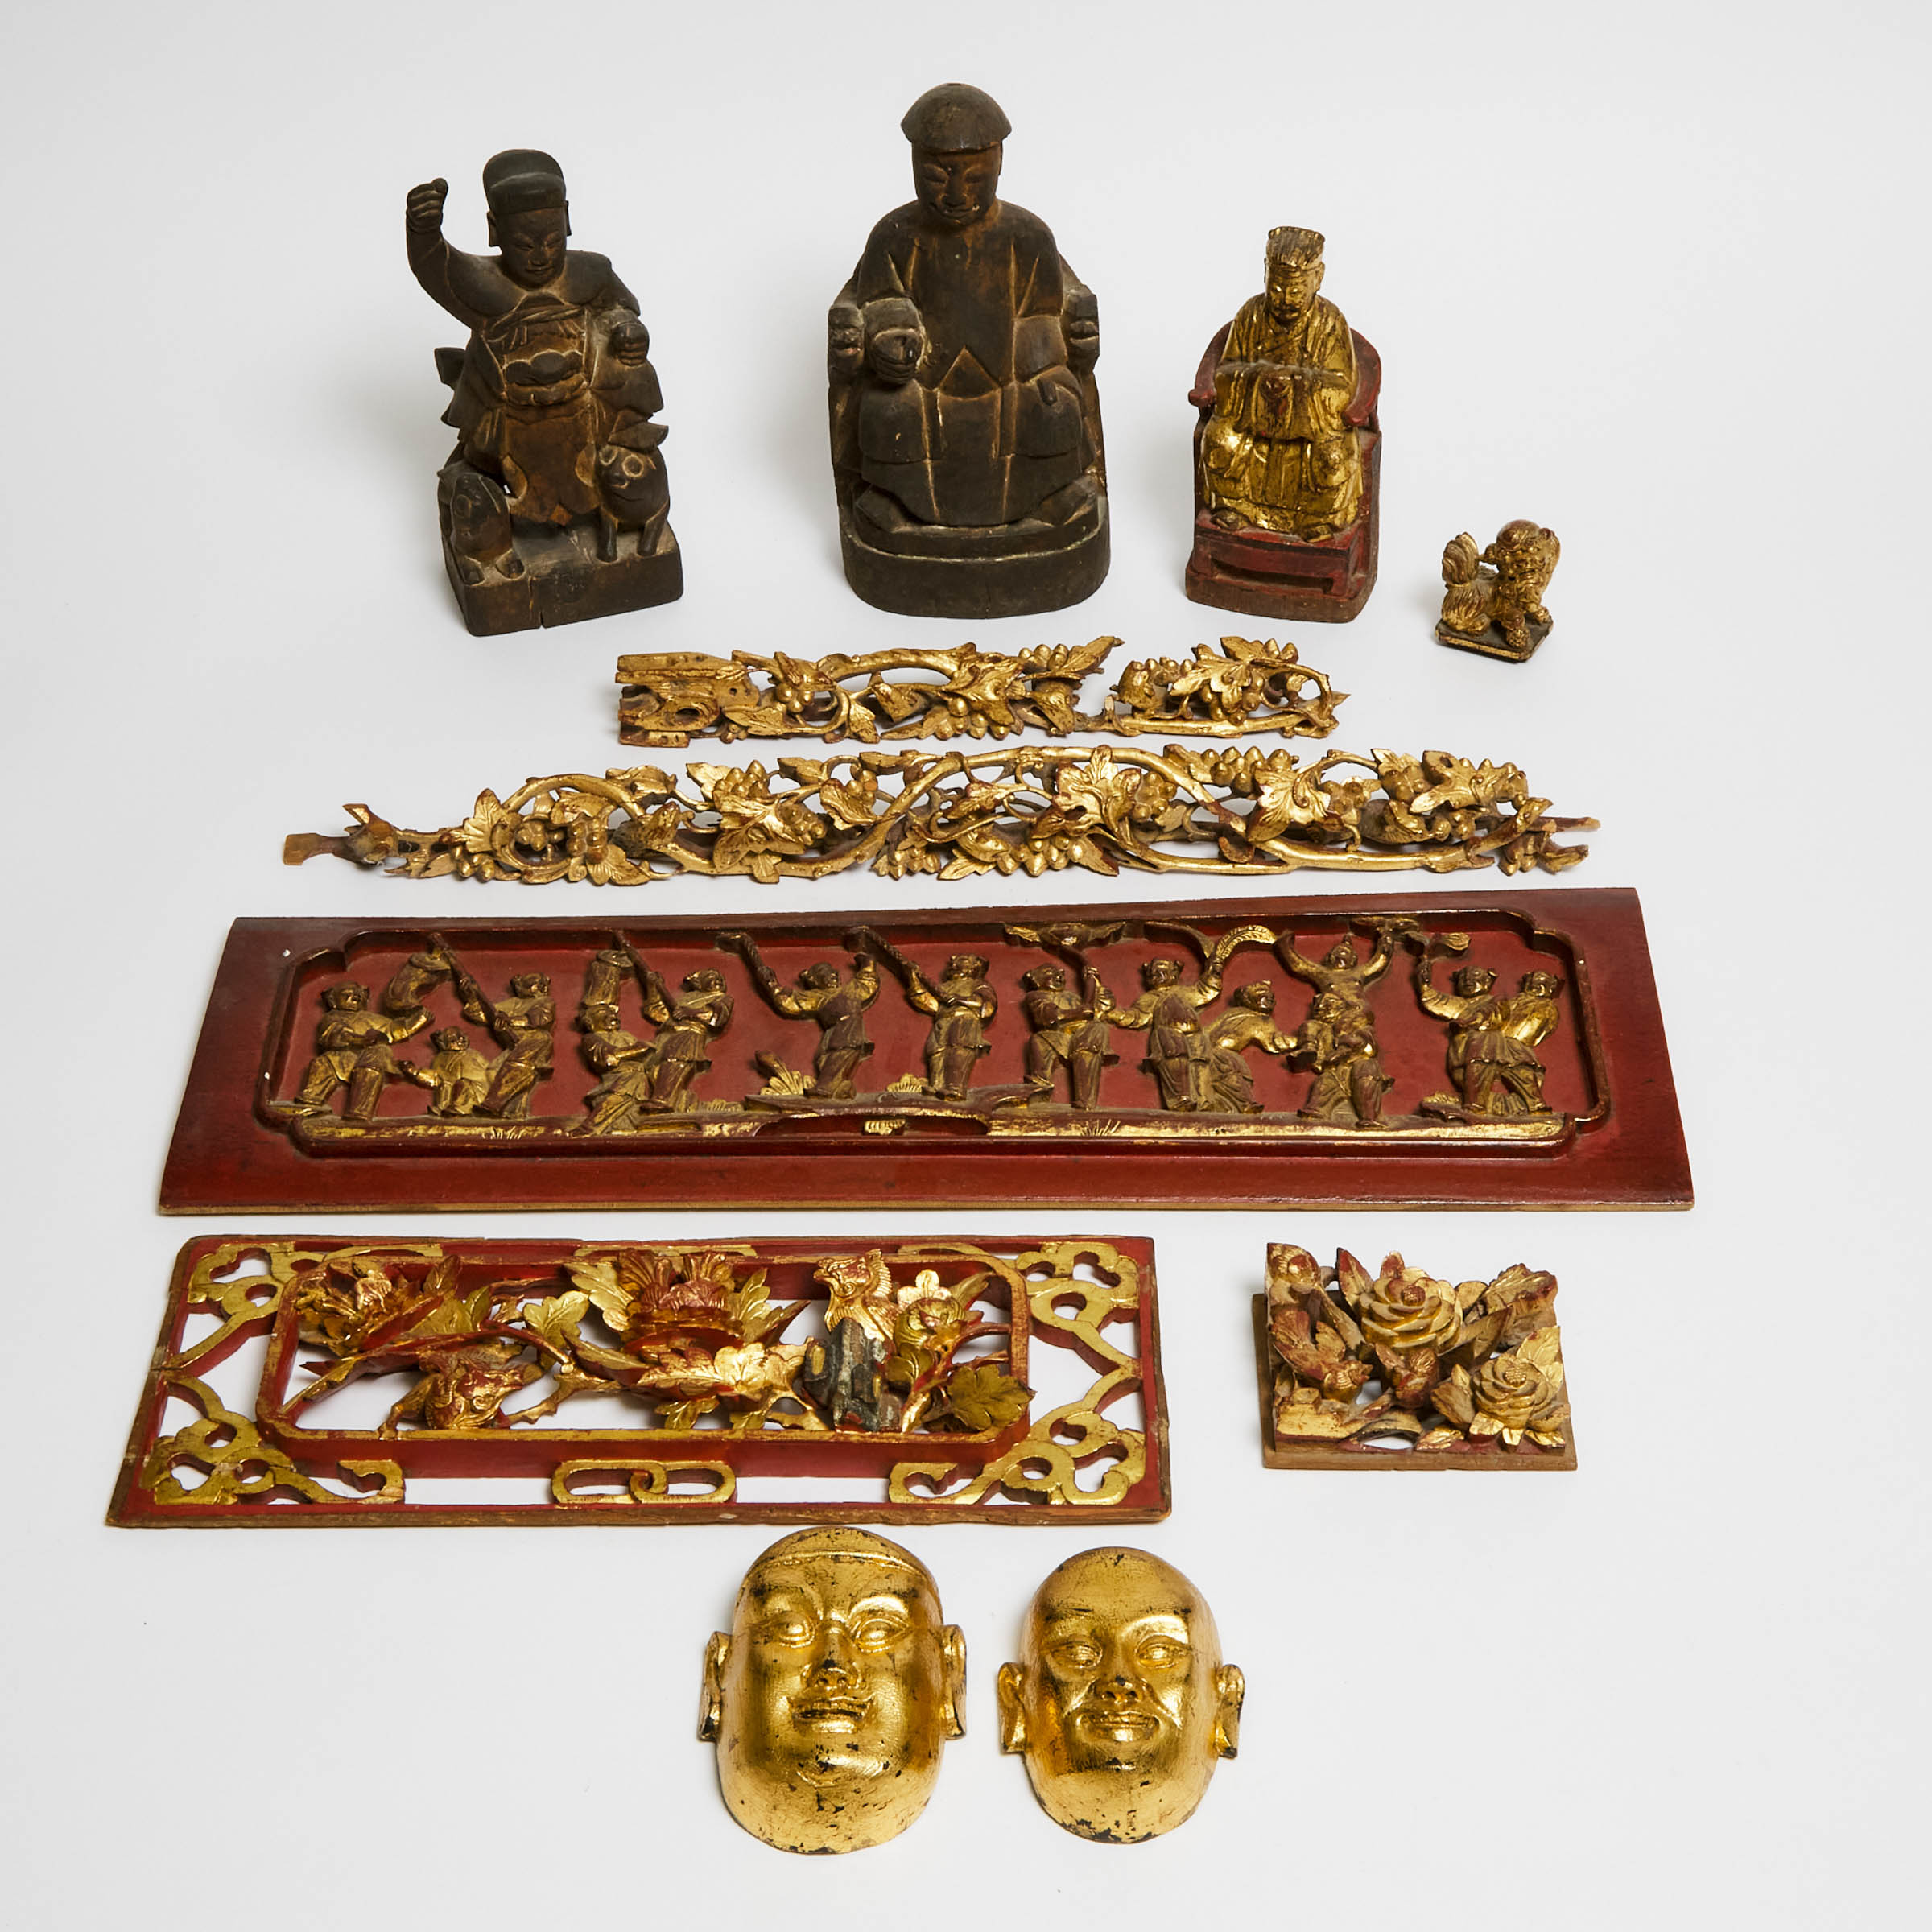 A Group of Eleven Chinese Gilt Wood Carvings, Late Qing Dynasty